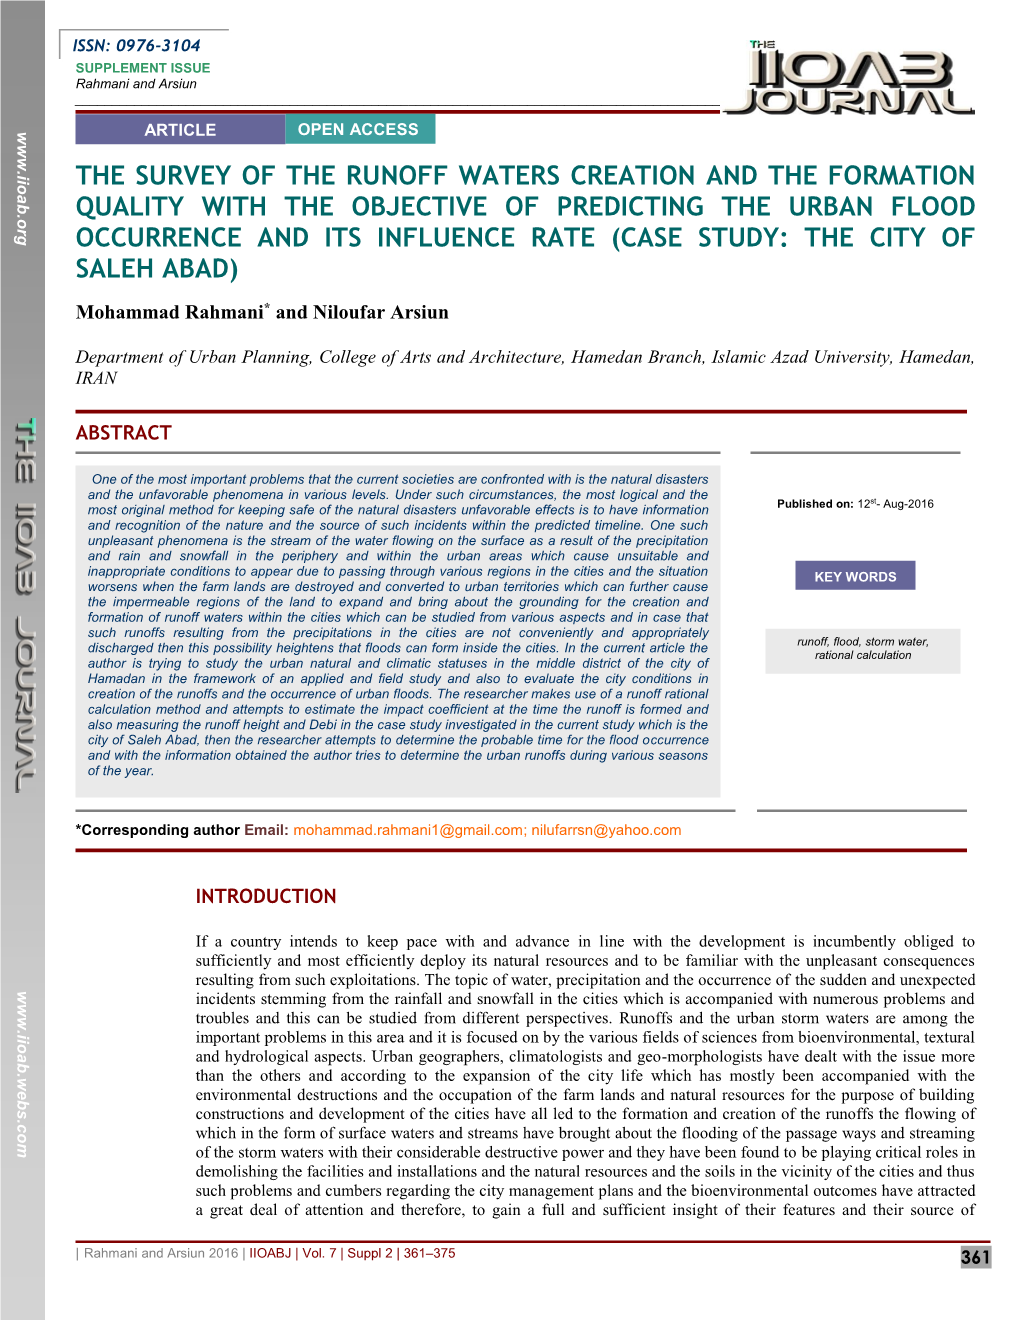 The Survey of the Runoff Waters Creation and the Formation Quality with the Objective of Predicting the Urban Flood